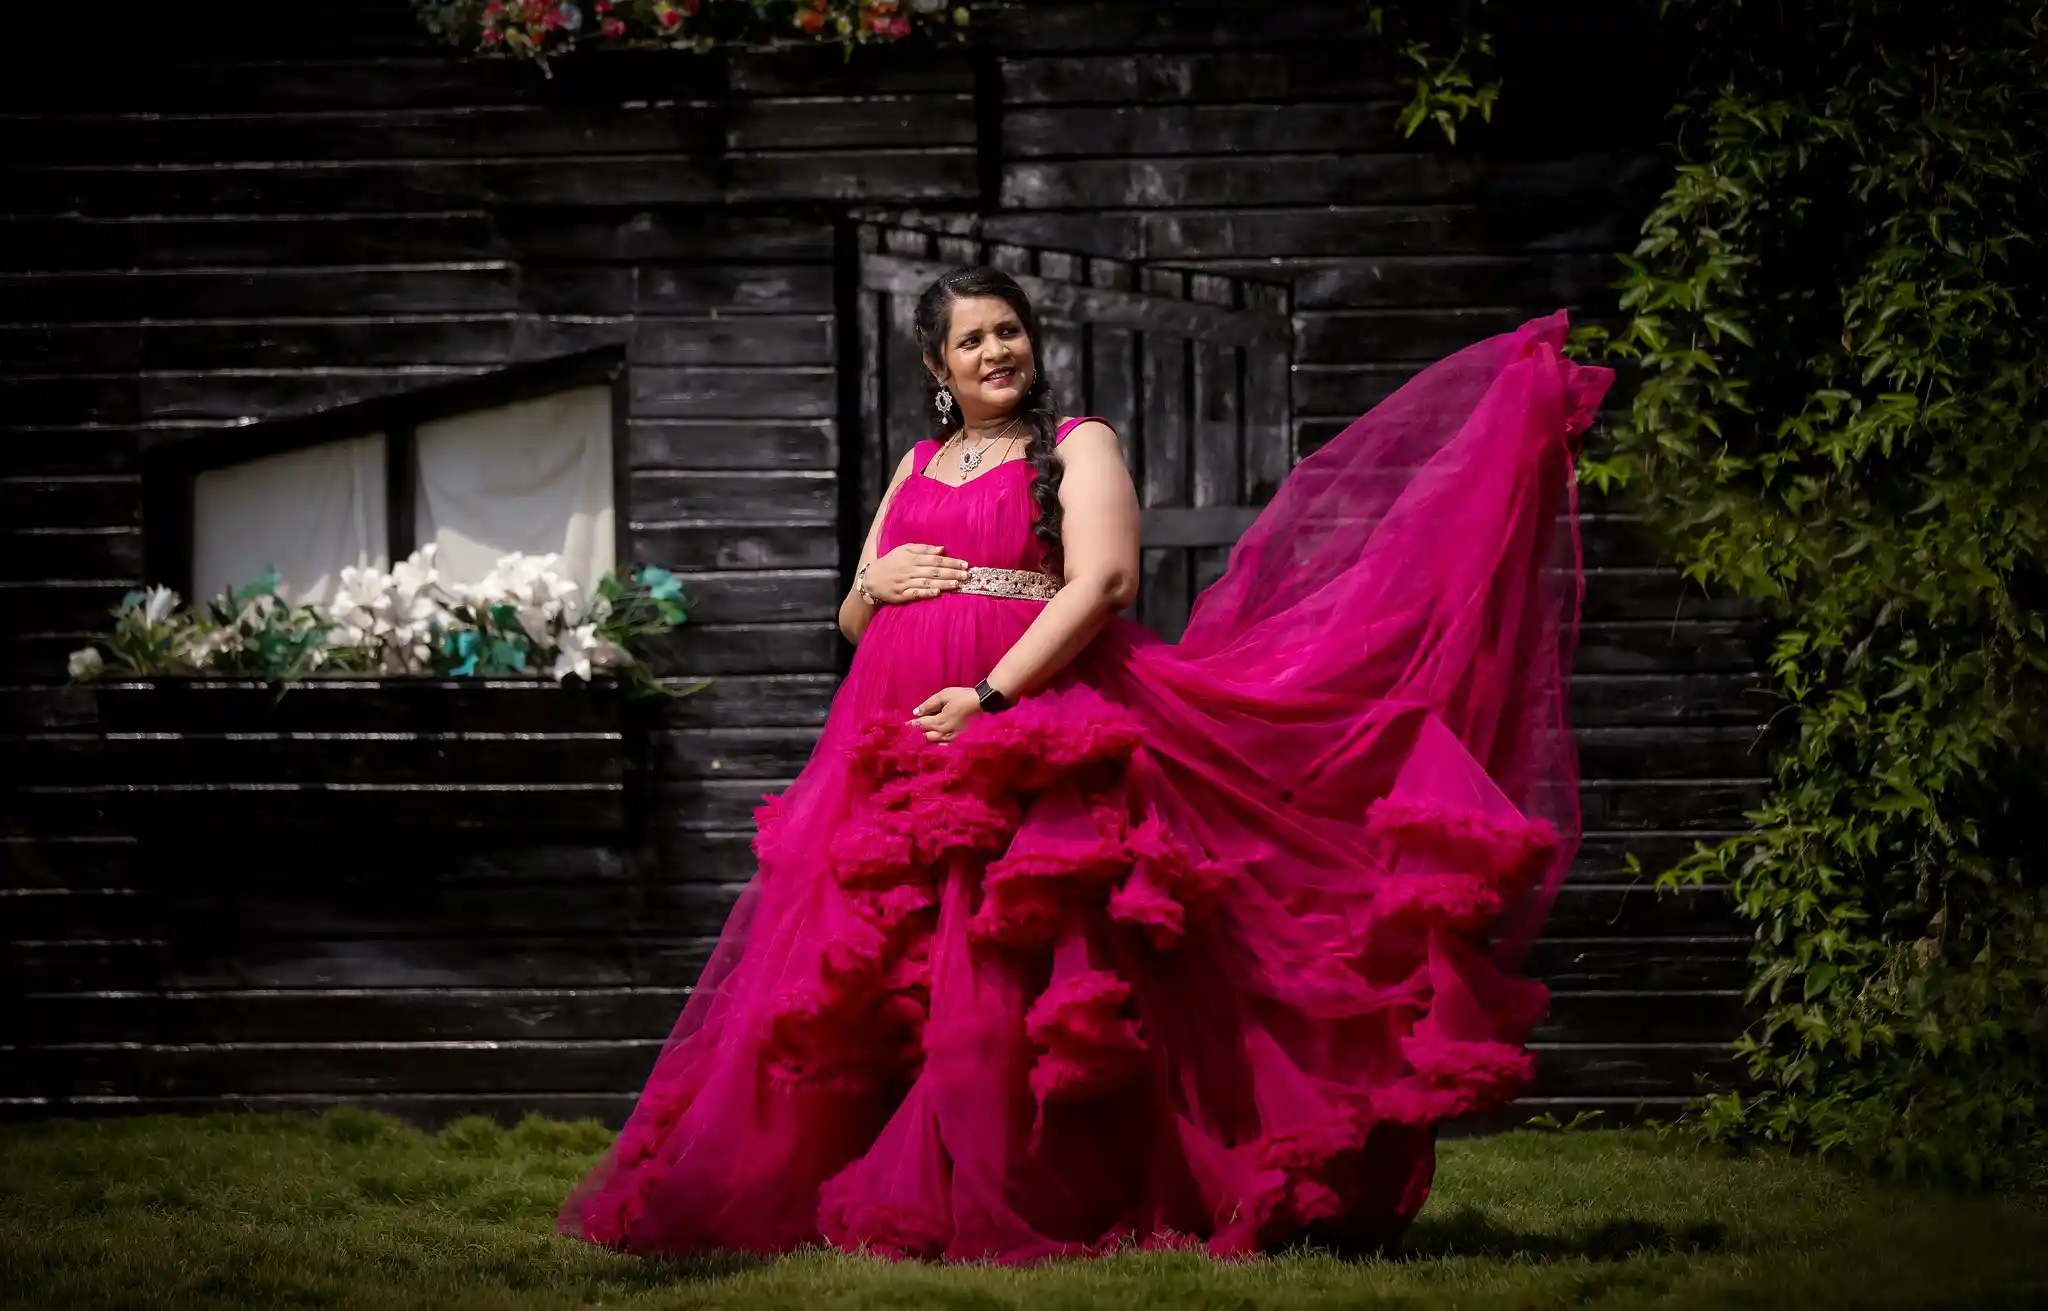 maternity photoshoot pose in pink gown